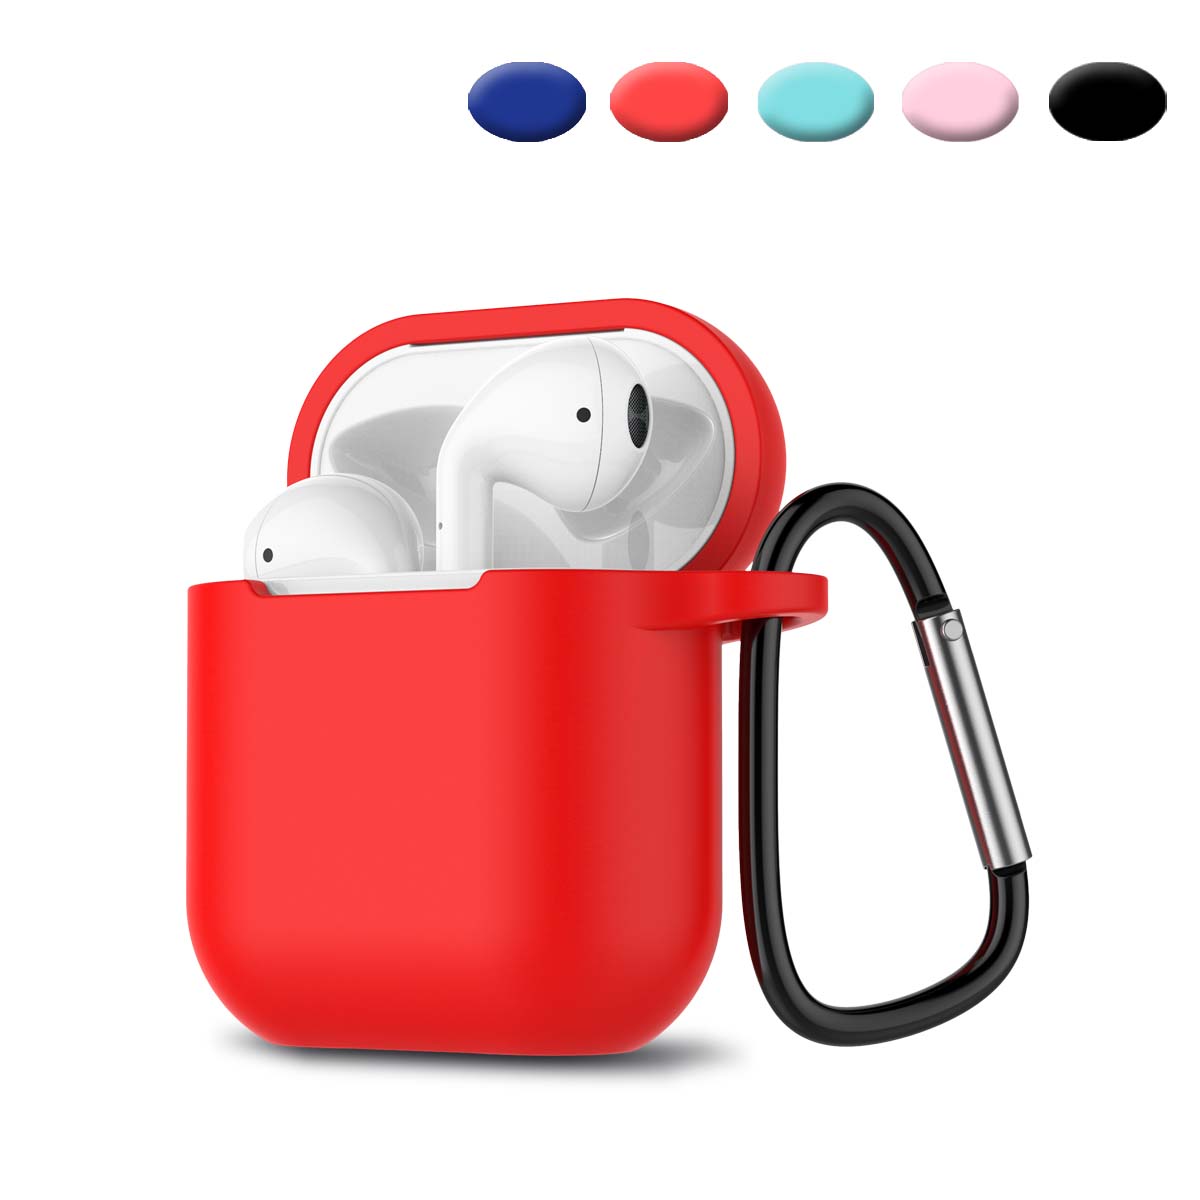 Apple Airpods 2 Skin, For Airpods Charging Case fur Ball for Airpods 2nd, Takfox Scratch-Resistant 360° Protective Portable Liquid Silicone Cover Skin For Airpods 2 Rubber Accessories + Keychain - image 1 of 6